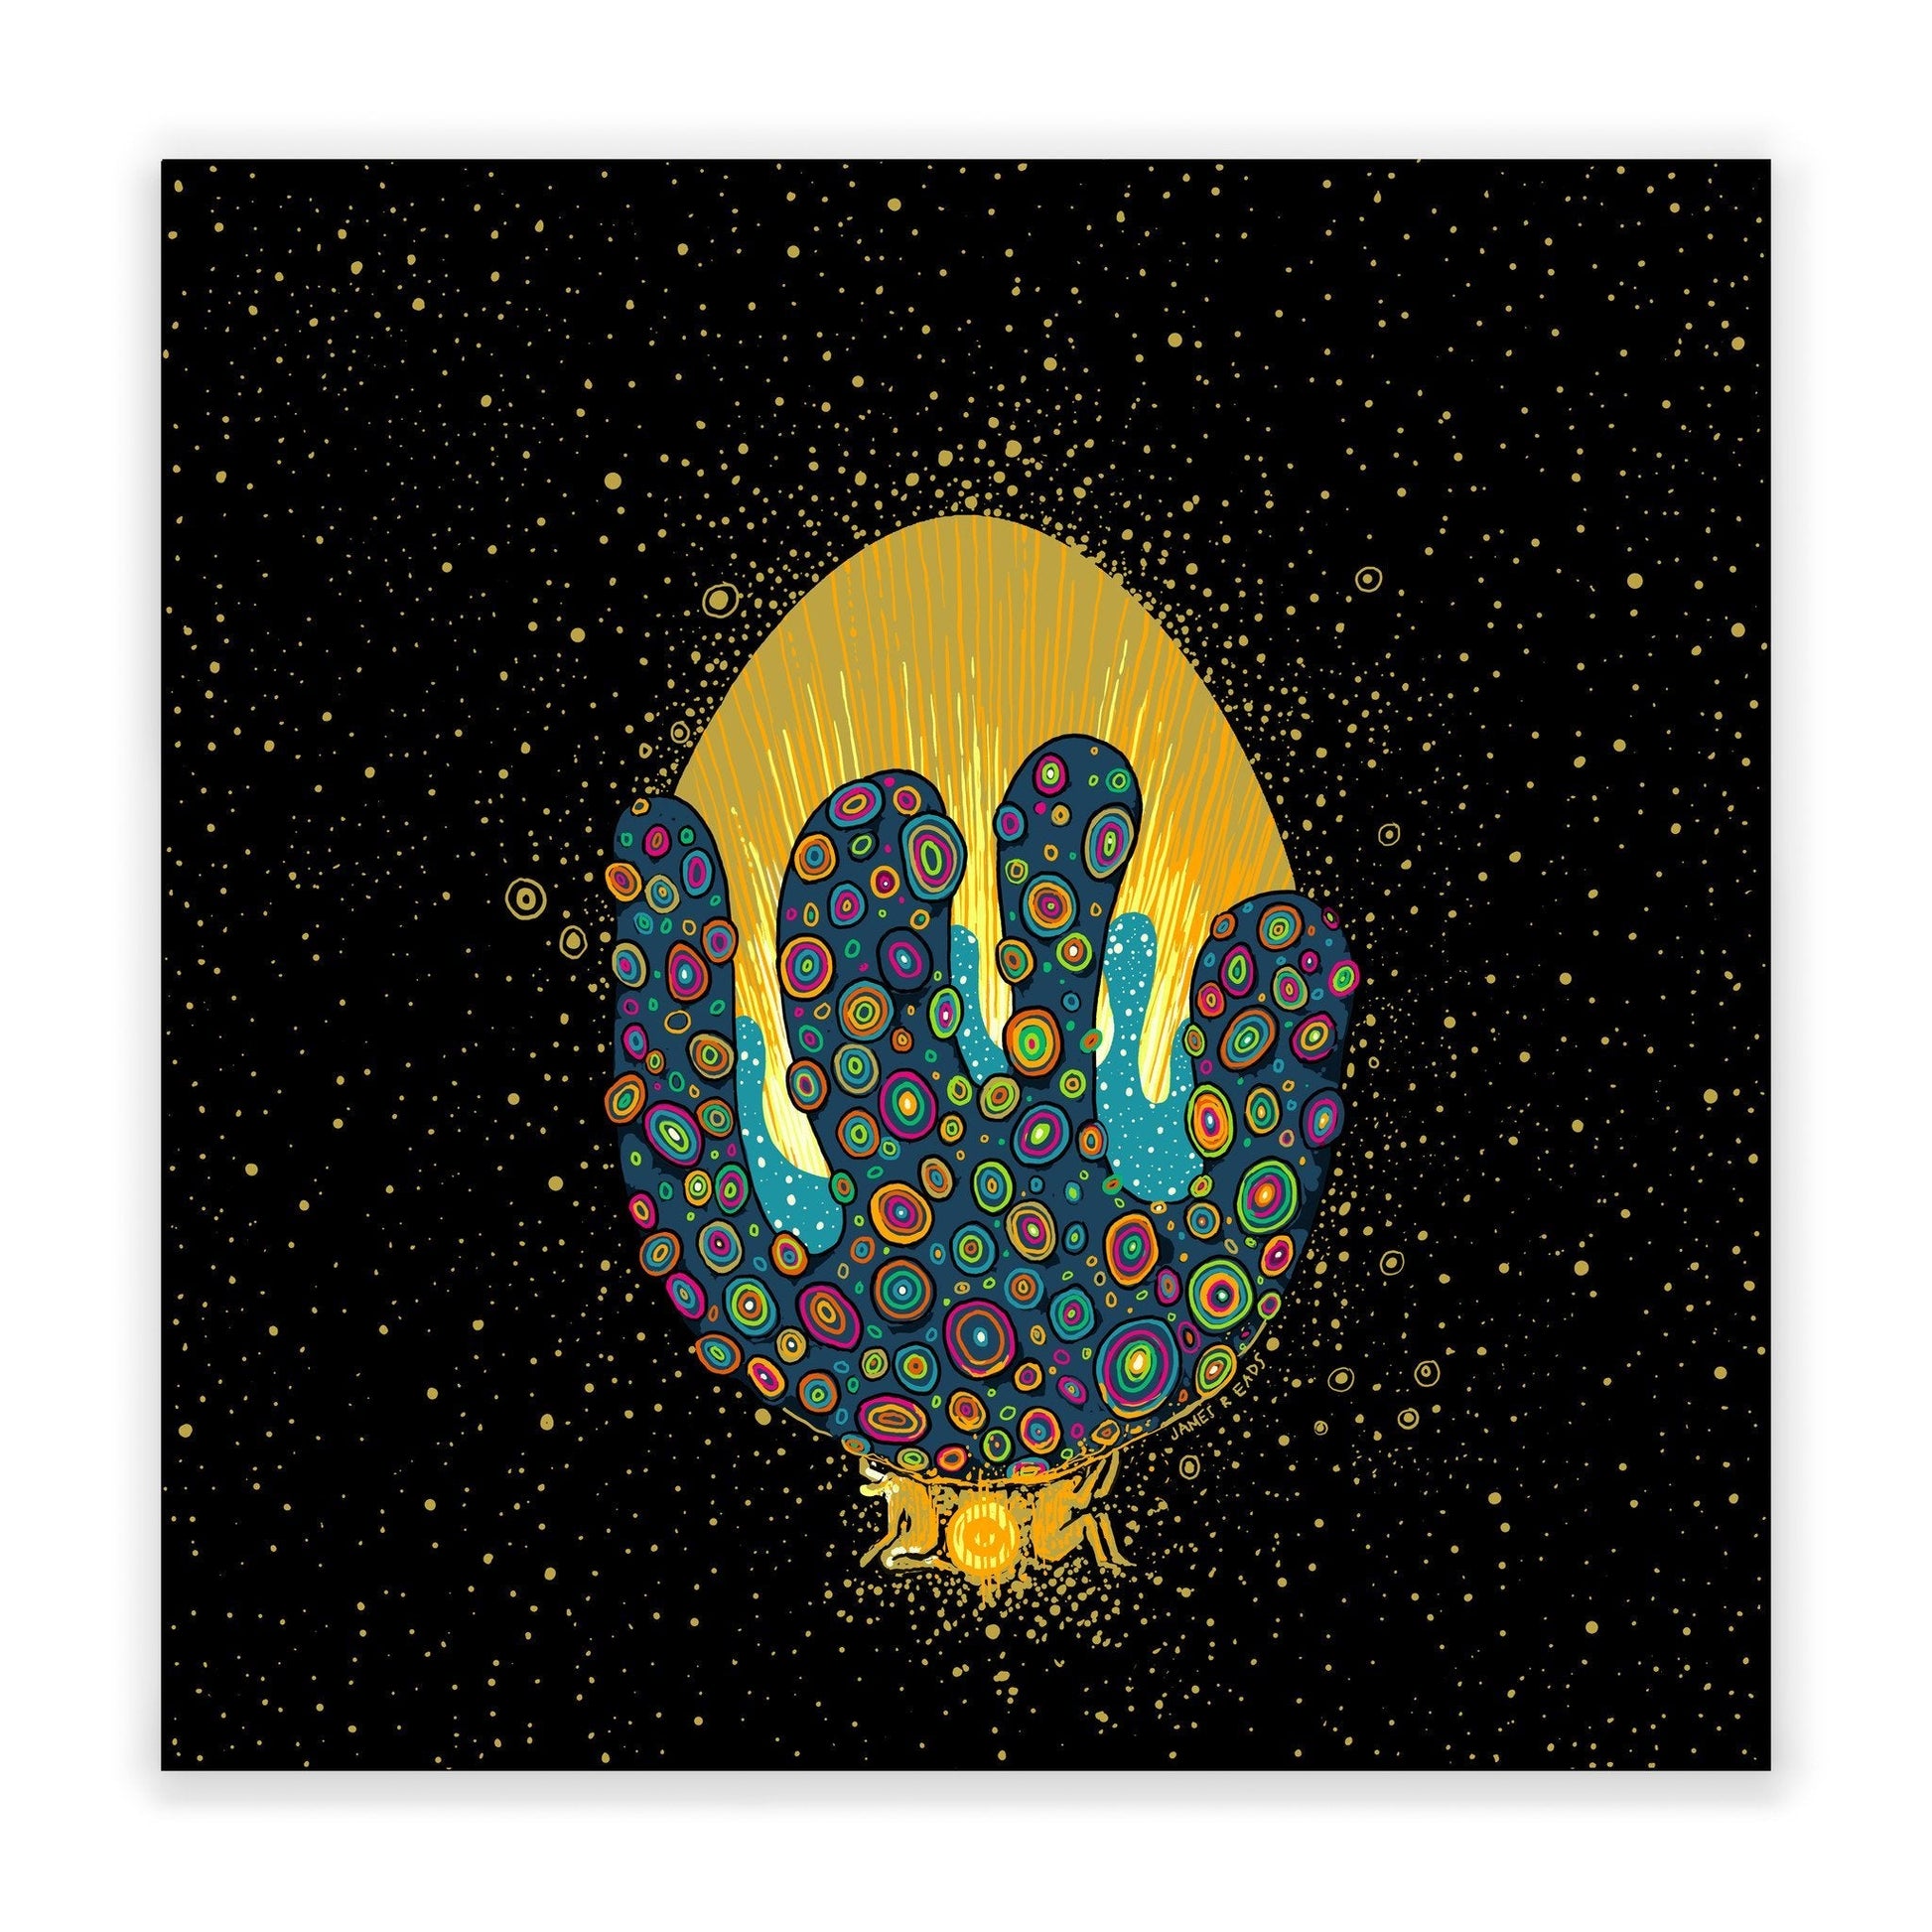 Golden Egg No. 2: The Reason for Weightiness James R. Eads